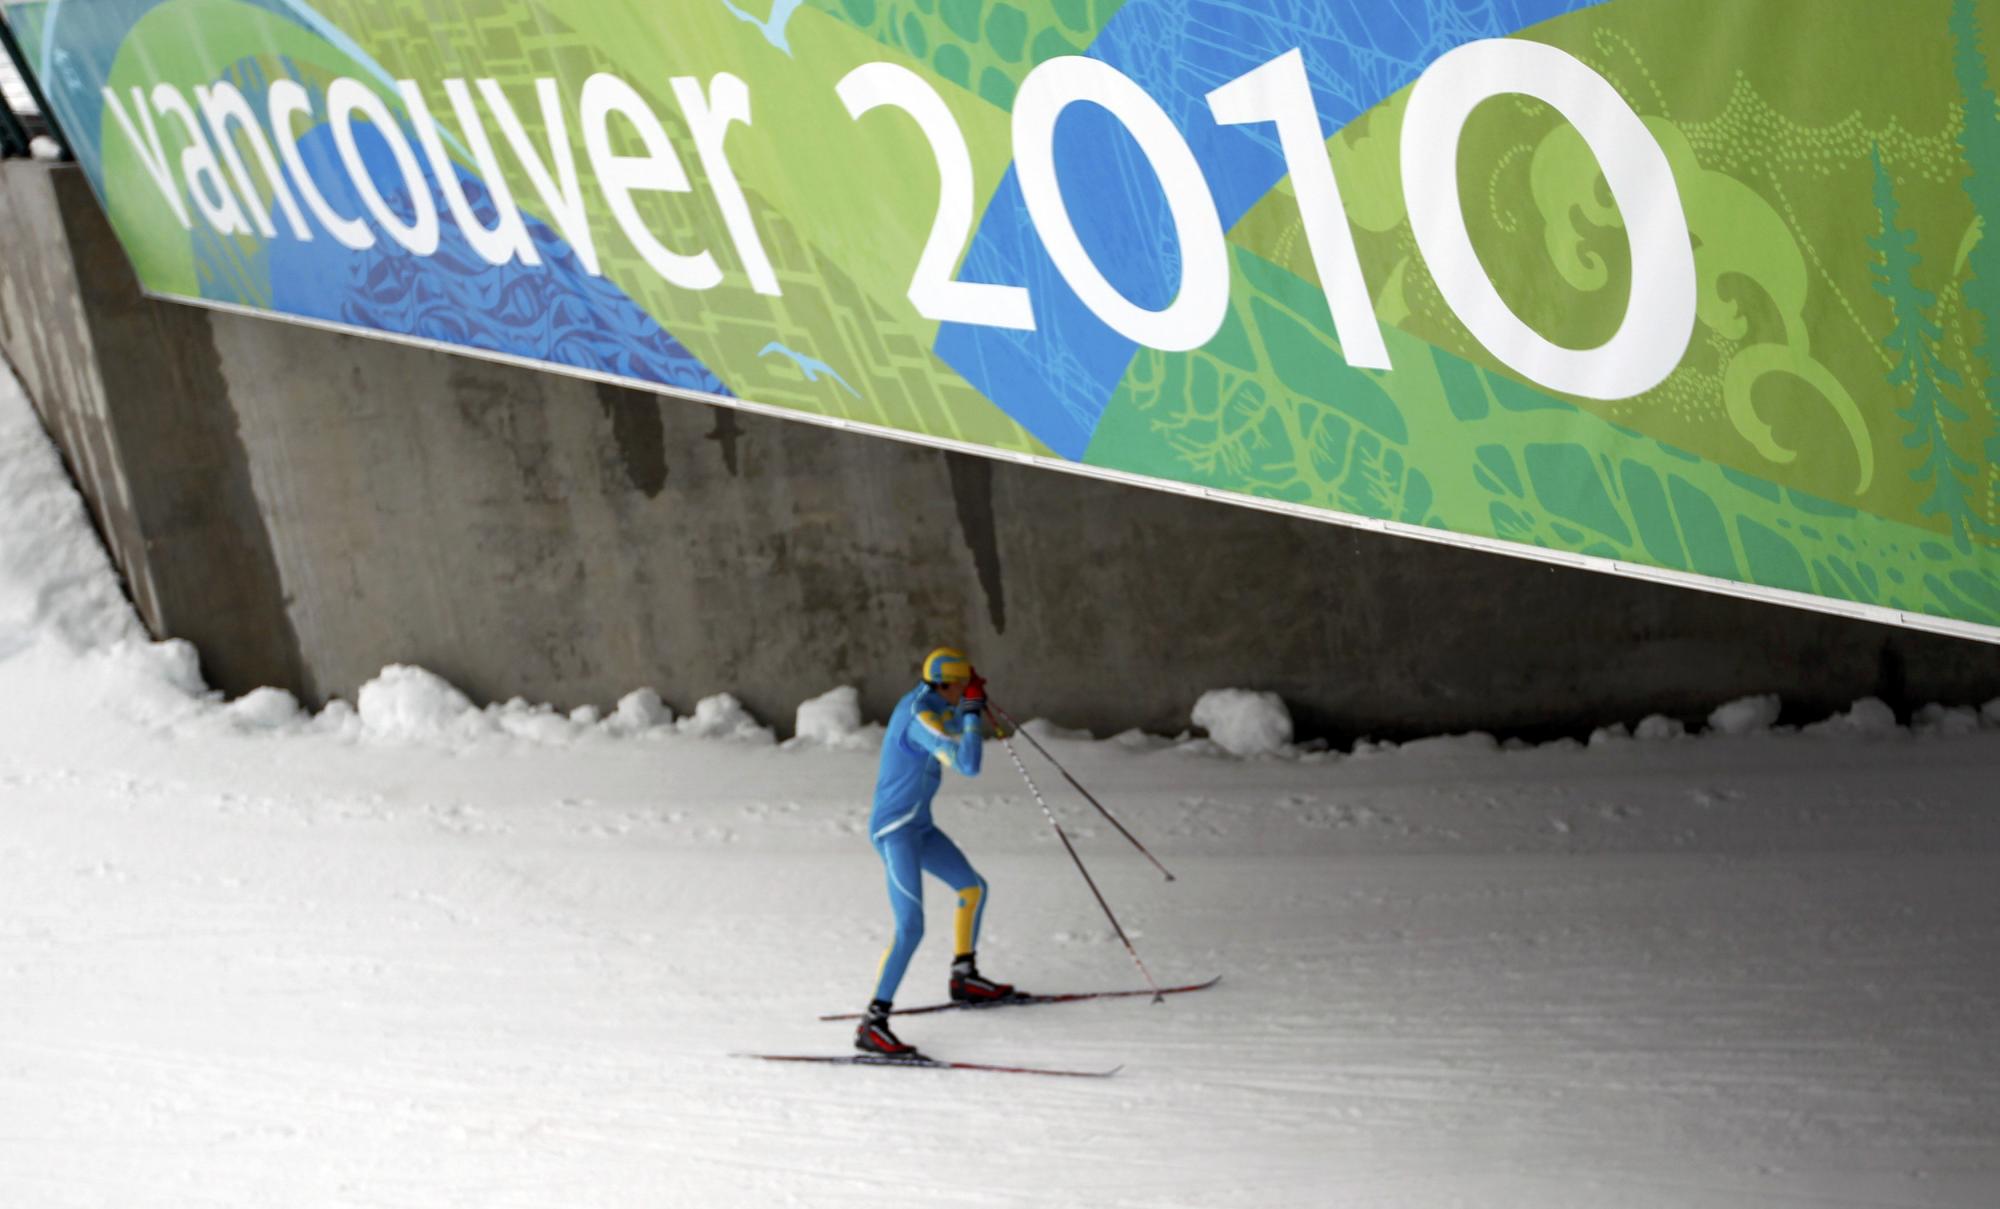 Vancouver revs up for Winter Games